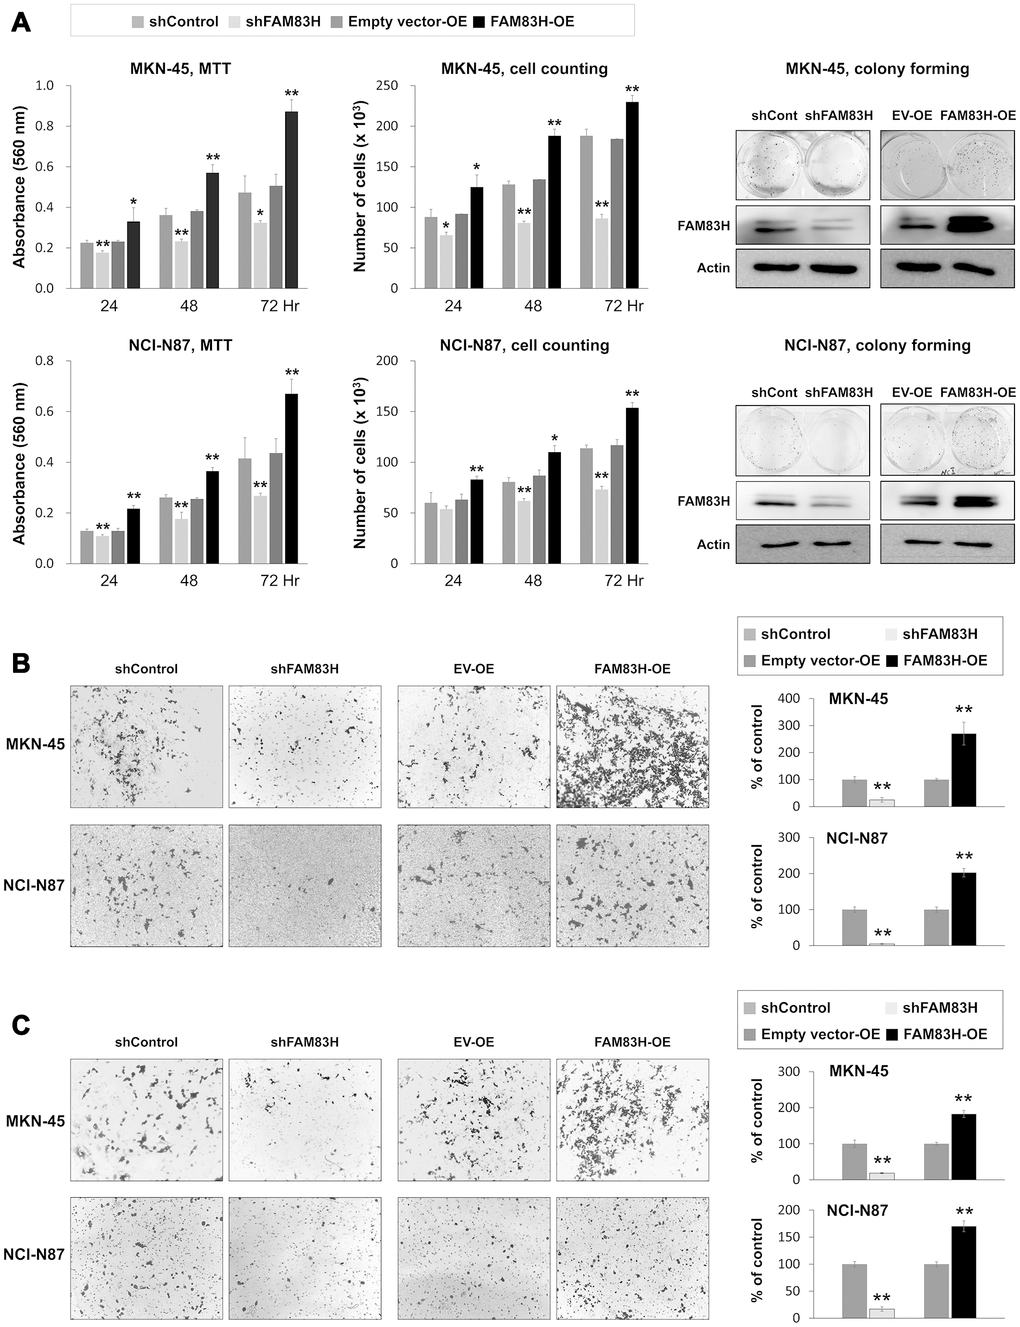 The effect of knock-down or overexpression of FAM83H on the proliferation and invasiveness of gastric cancer cells. (A) The effect of knock-down or overexpression of FAM83H on proliferation were evaluated with an MTT assay, cell counting, and a colony-forming assay in MKN-45 and NCI-N87 cells. The MTT assay was performed after seeding 3,000 cells per well of a 96-well plate. Cell counting was performed after seeding 3,000 cells per well of a 6-well plate. The colony-forming assay was performed by plating 1,000 cells per well in a 6-well plate for ten days. The knock-down or overexpression of FAM83H was assessed via western blot for FAM83H. (B) The migration assay was performed by seeding 1x105 MKN-45 or 1x105 NCI-N87 cells in the upper chamber for 48 hours. (C) The invasion assay was performed by seeding 2x105 MKN-45 or 2x105 NCI-N87 cells in the upper chamber with Matrigel for 48 hours. The chambers were stained with DIFF-Quik staining solution, and the number of migrated or invaded cells were counted in five x200 microscopic fields in each well. *; P P 